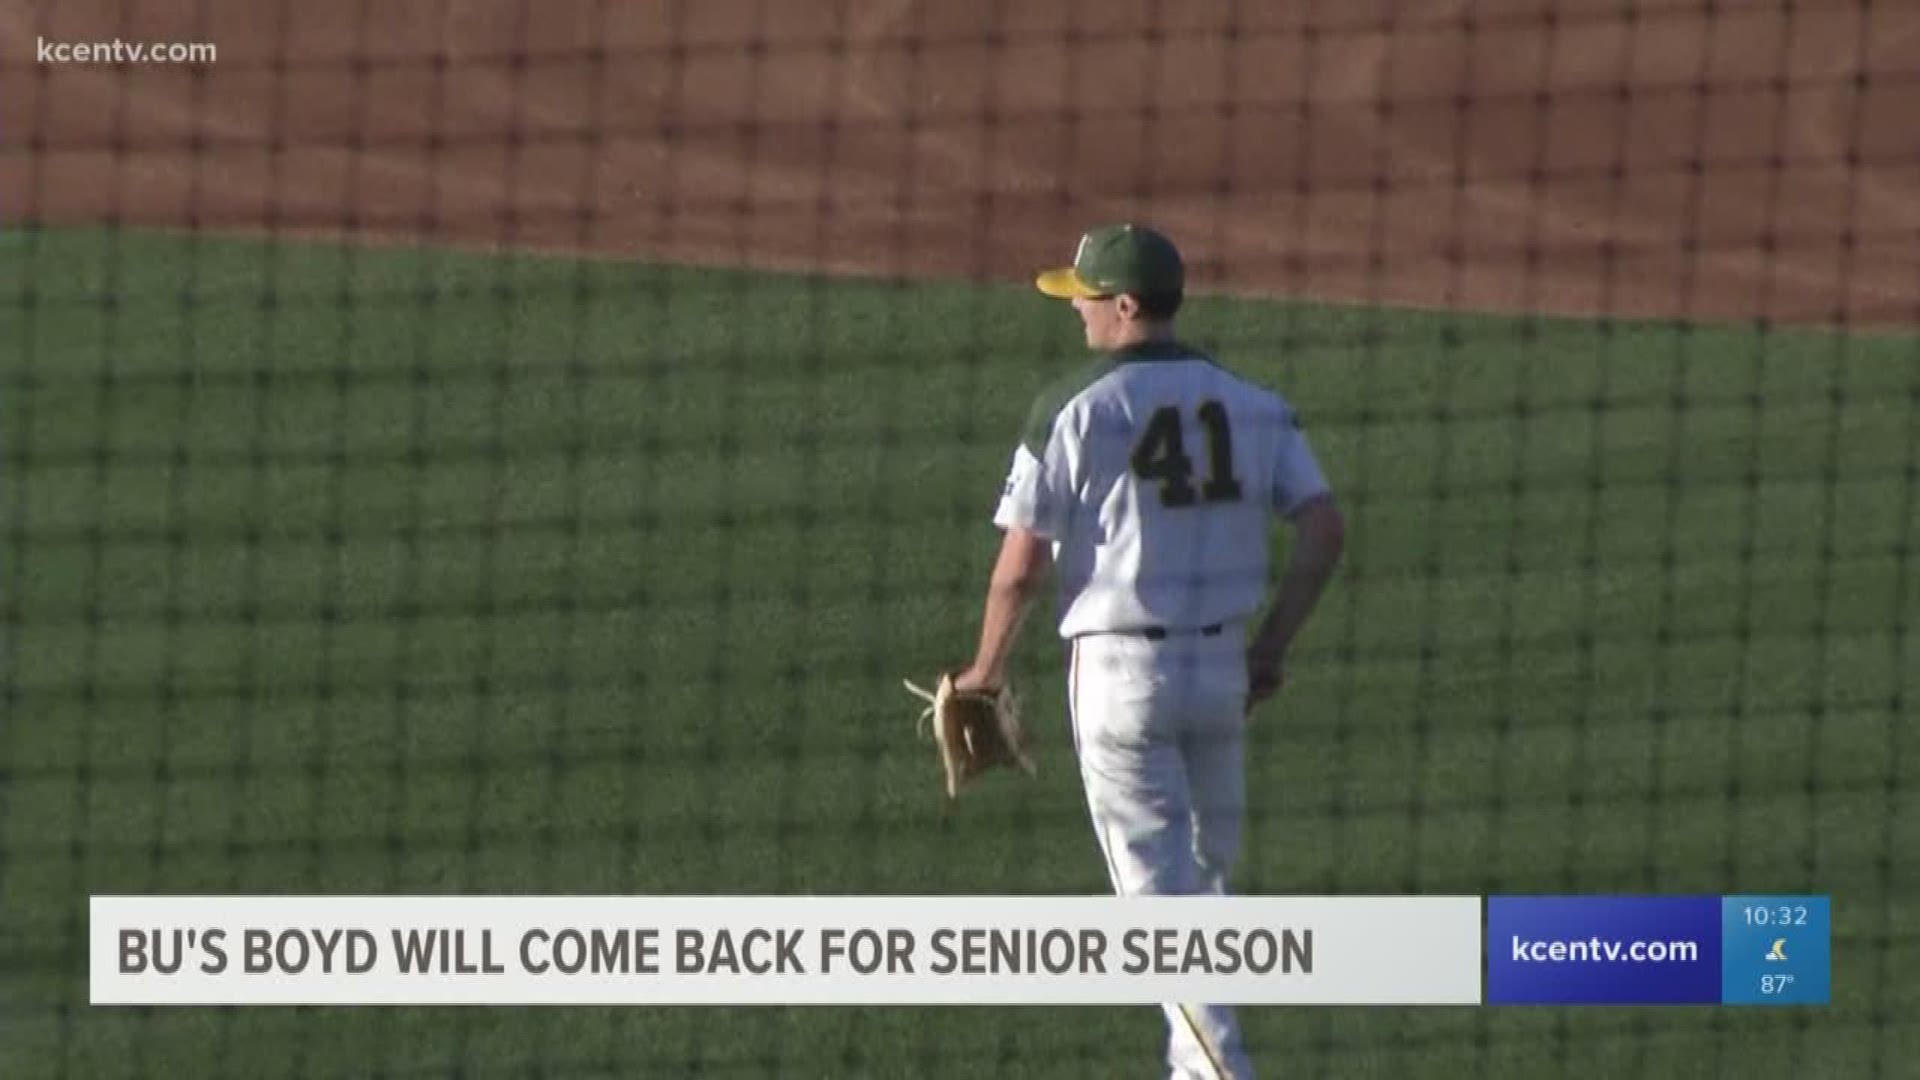 The pitcher was drafted by the Los Angeles Angels in the 38th round Thursday. He will return to Baylor for his senior season.